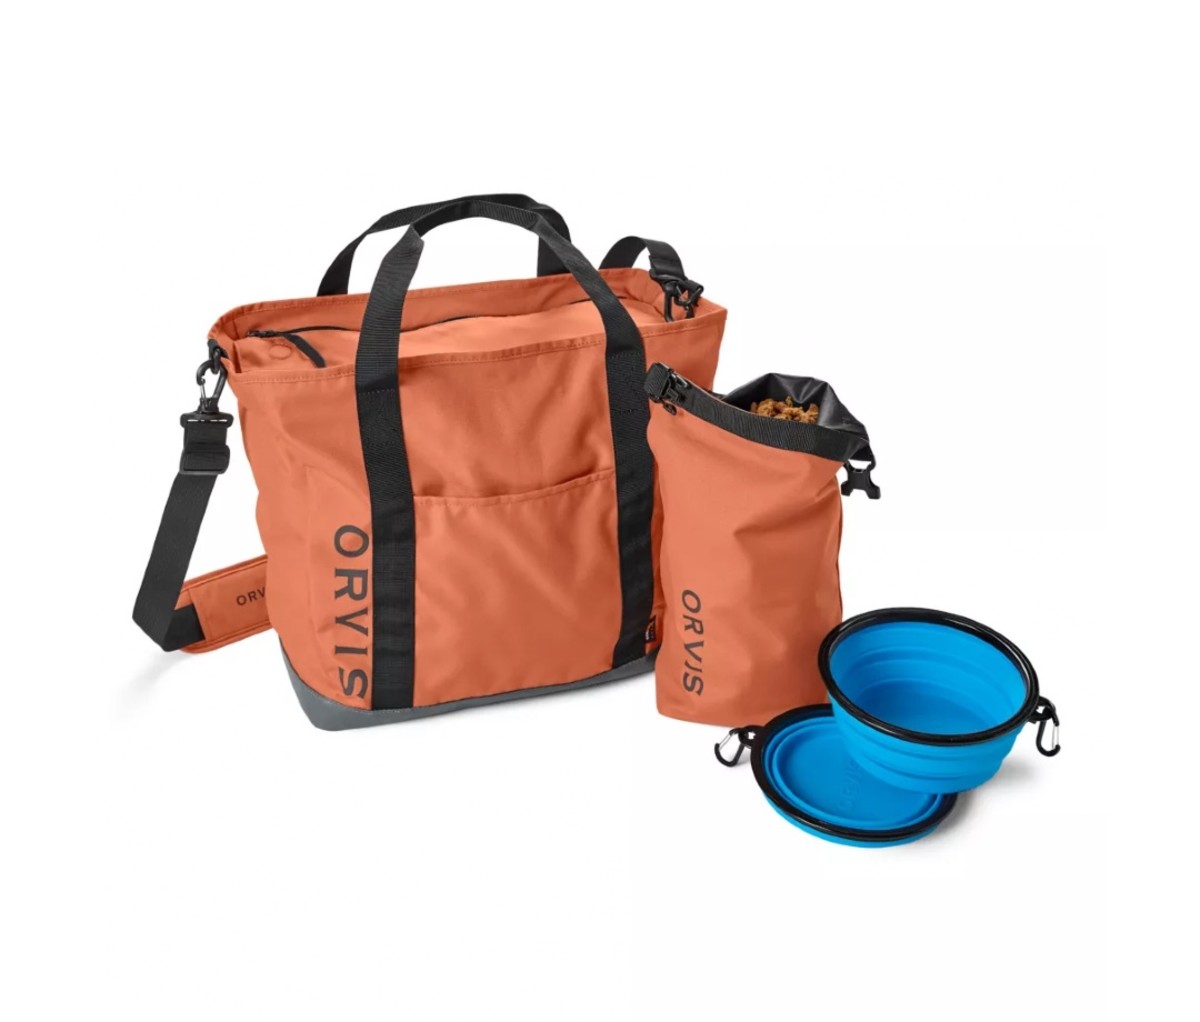 All of your dog supplies will be at your fingertips with the Orvis Chuckwagon dog tote.